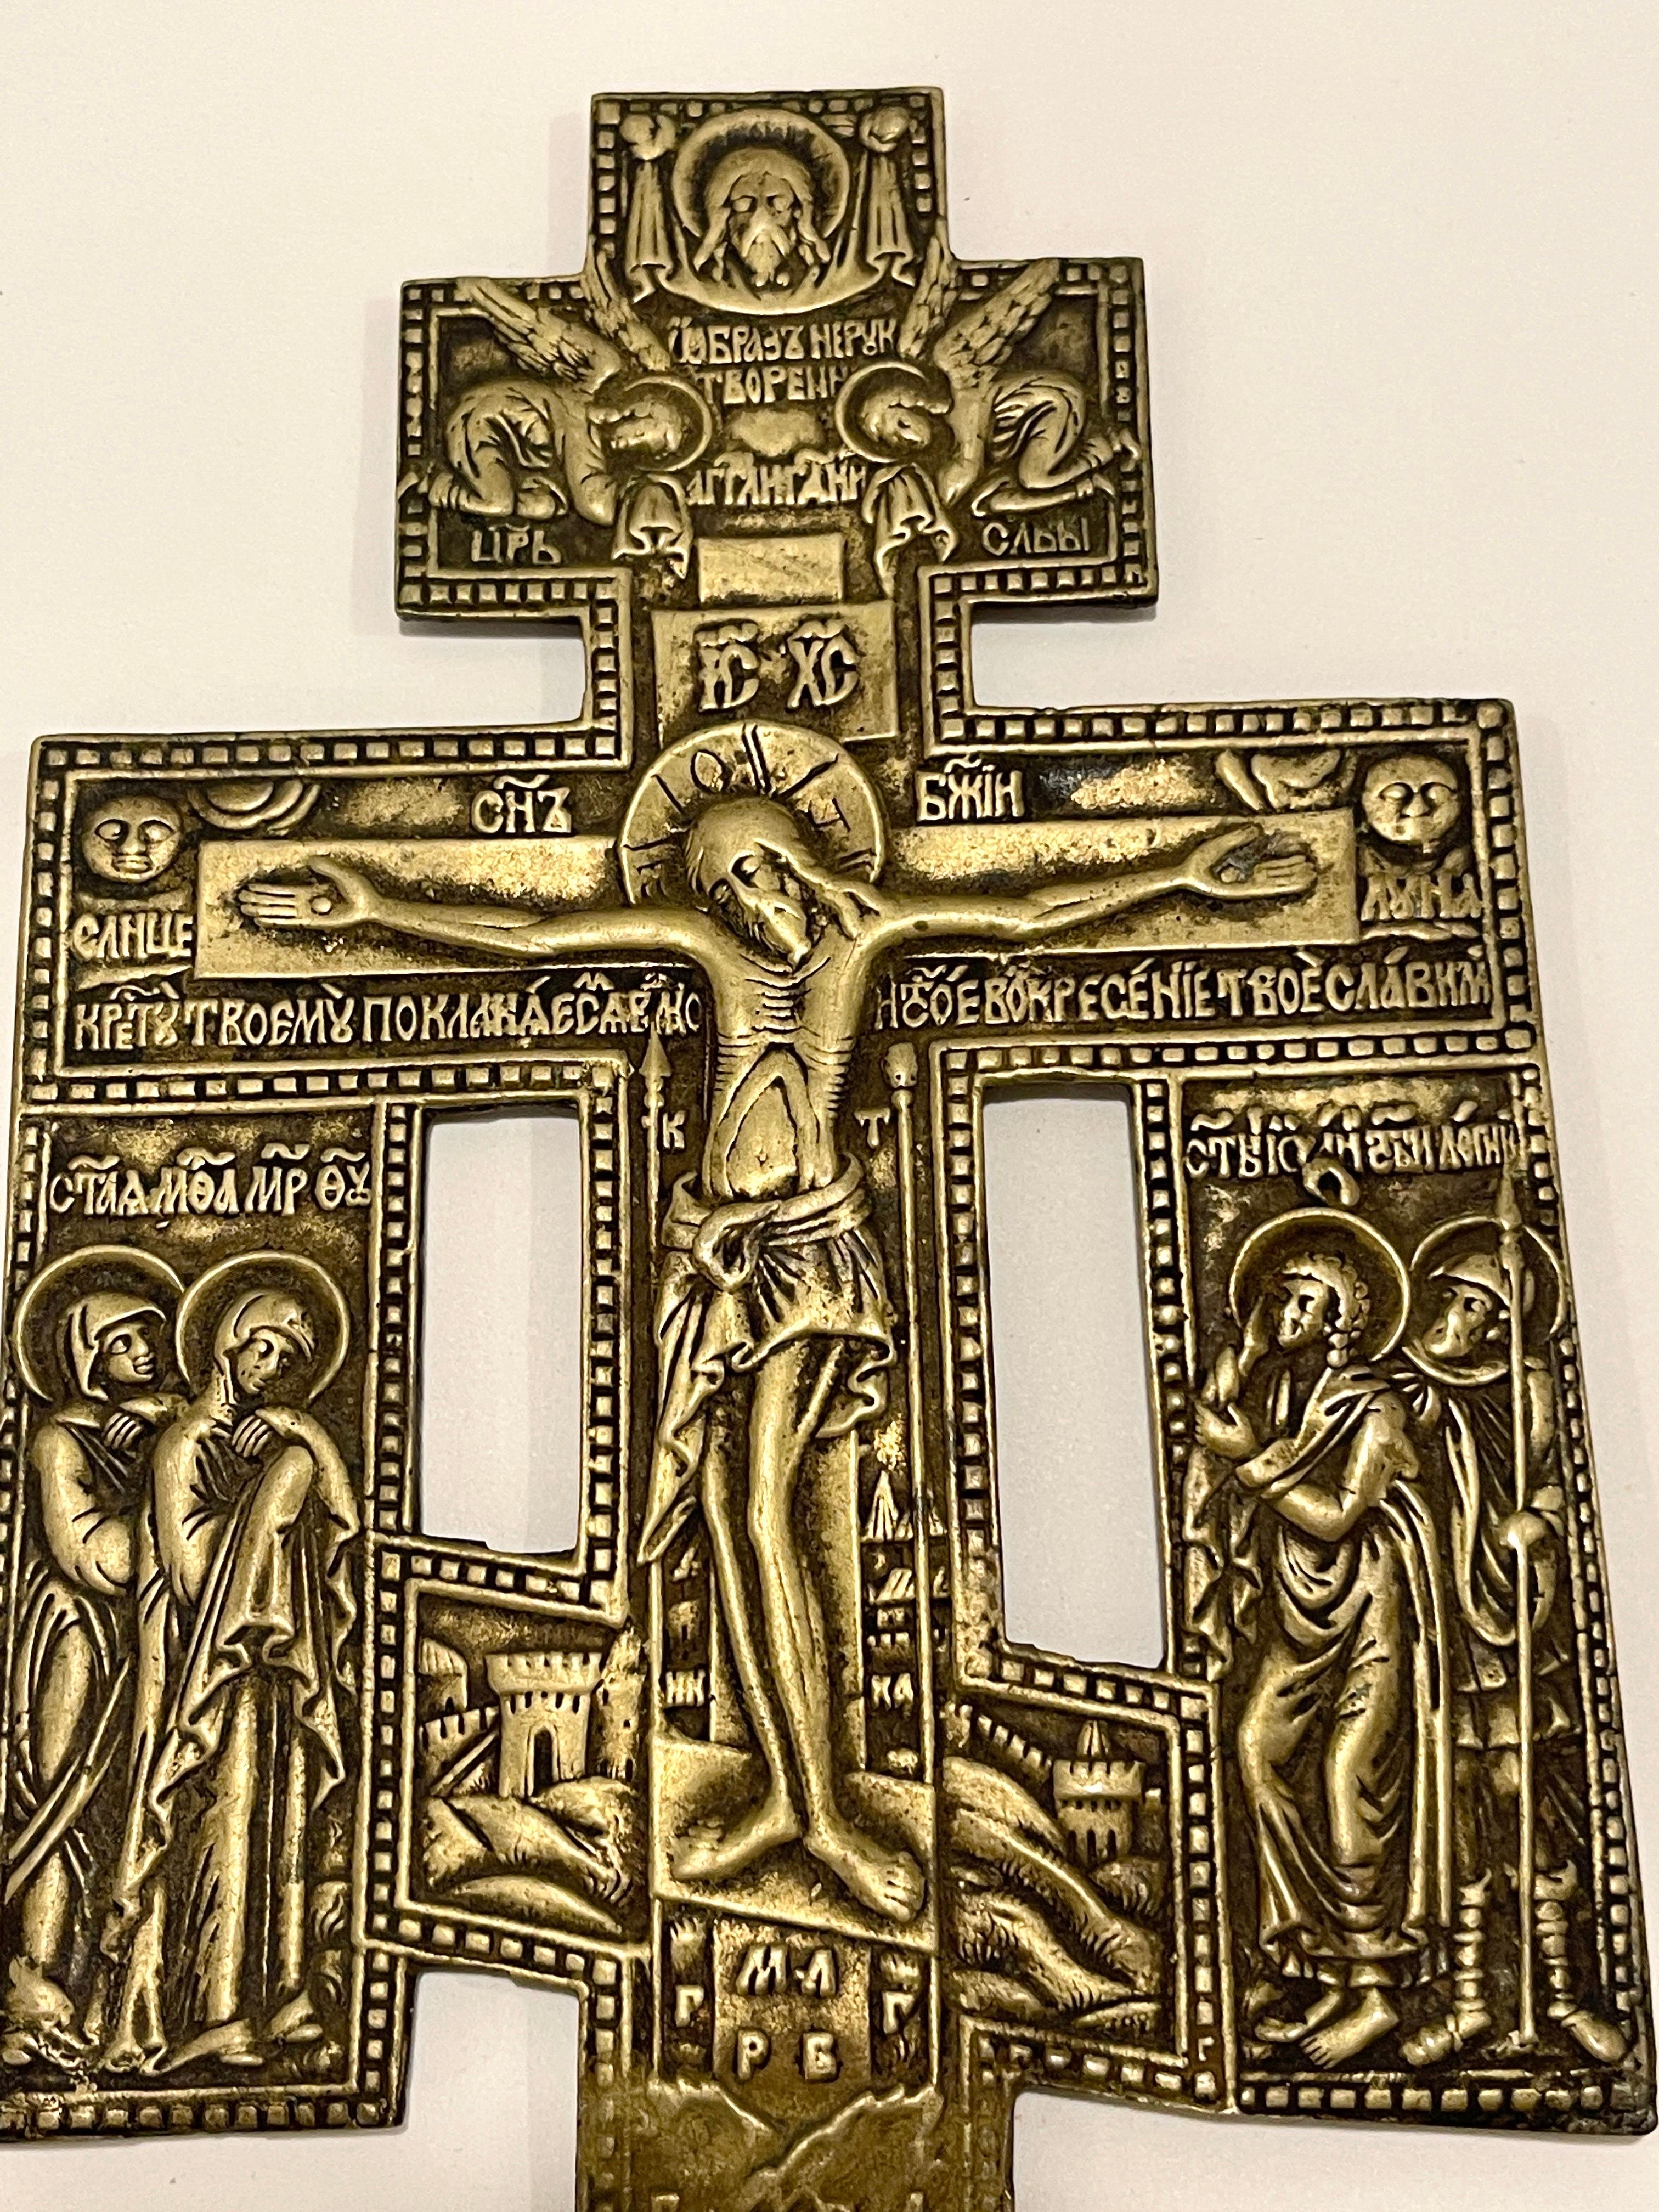 Antique Ornately Cast Gilt Bronze Russian Orthodox Christian Cross or Crucifix
Late 19th/Early 20th C, Russian or the Ukraine

A finely cast and gilt bronze Russian Orthodox Christian Cross or Crucifix . This work is intricately cast with Jesus